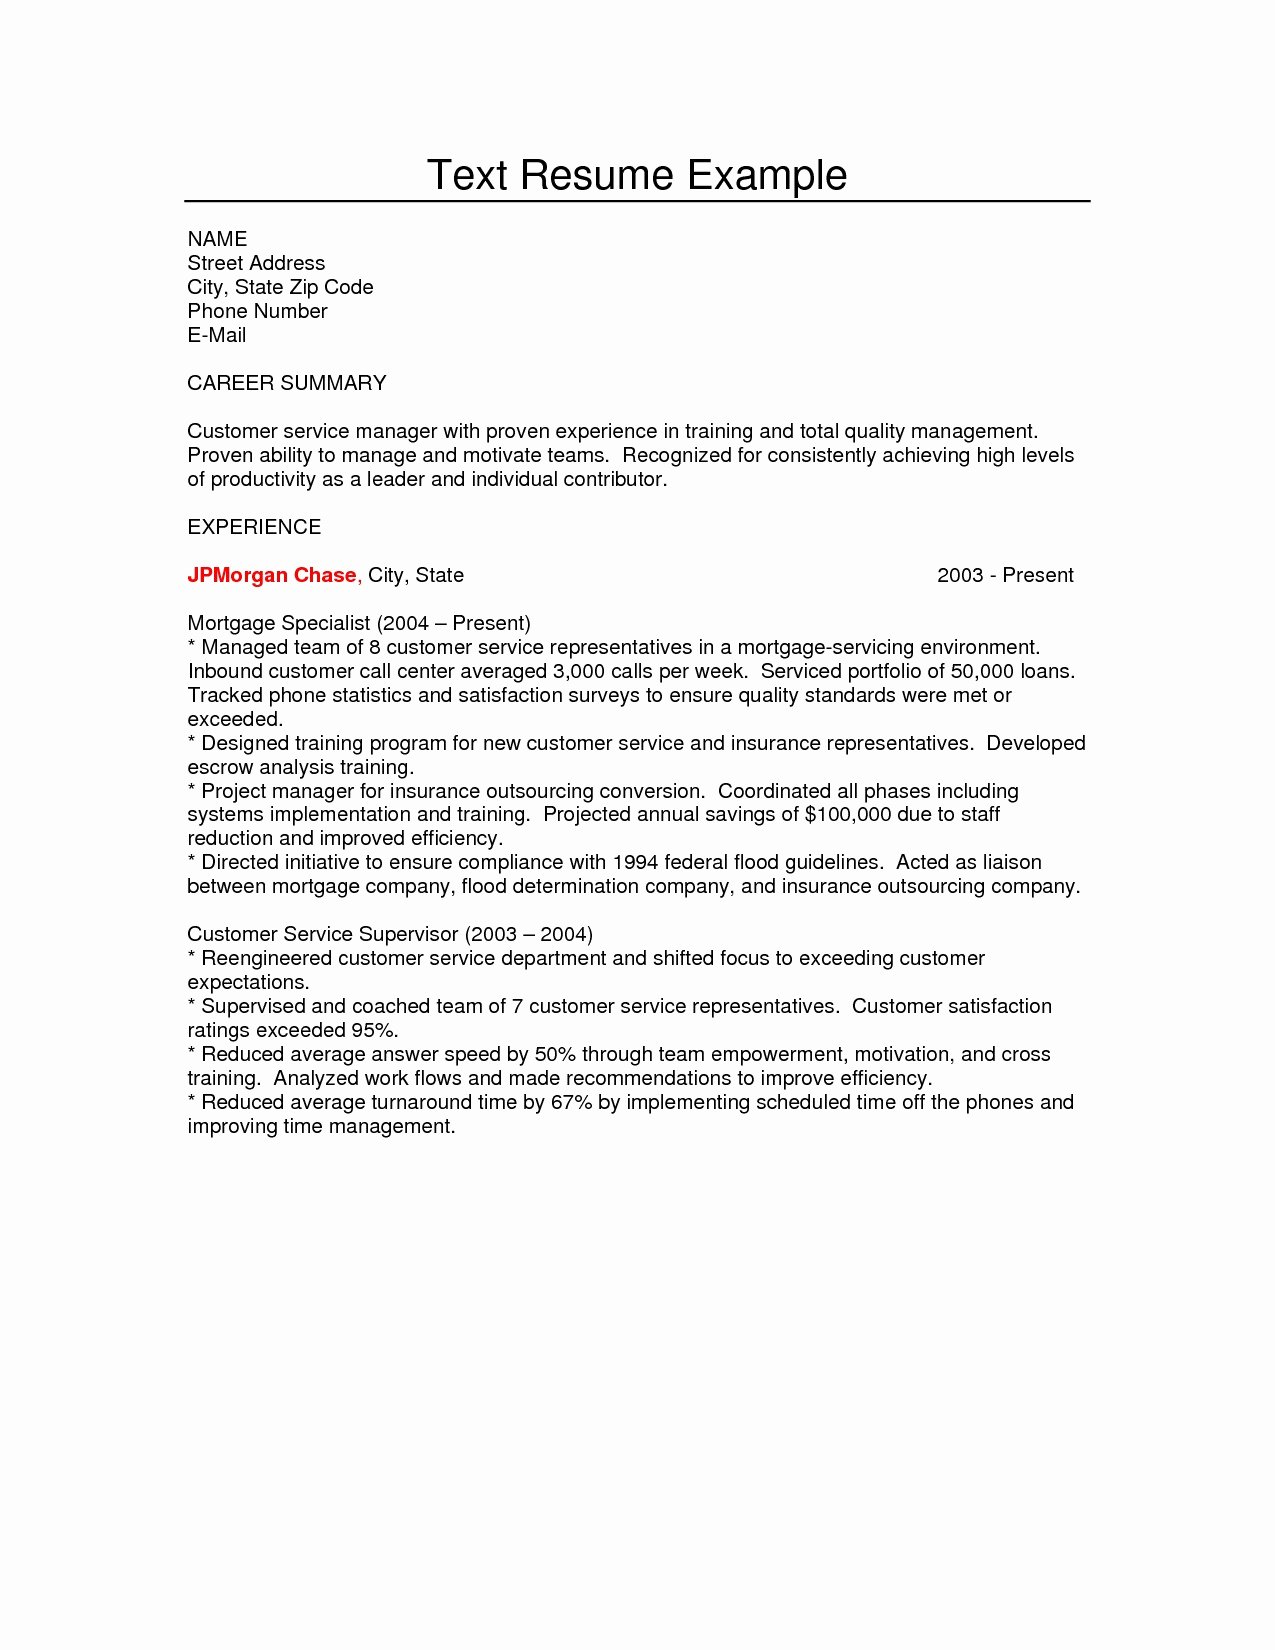 resume text examples